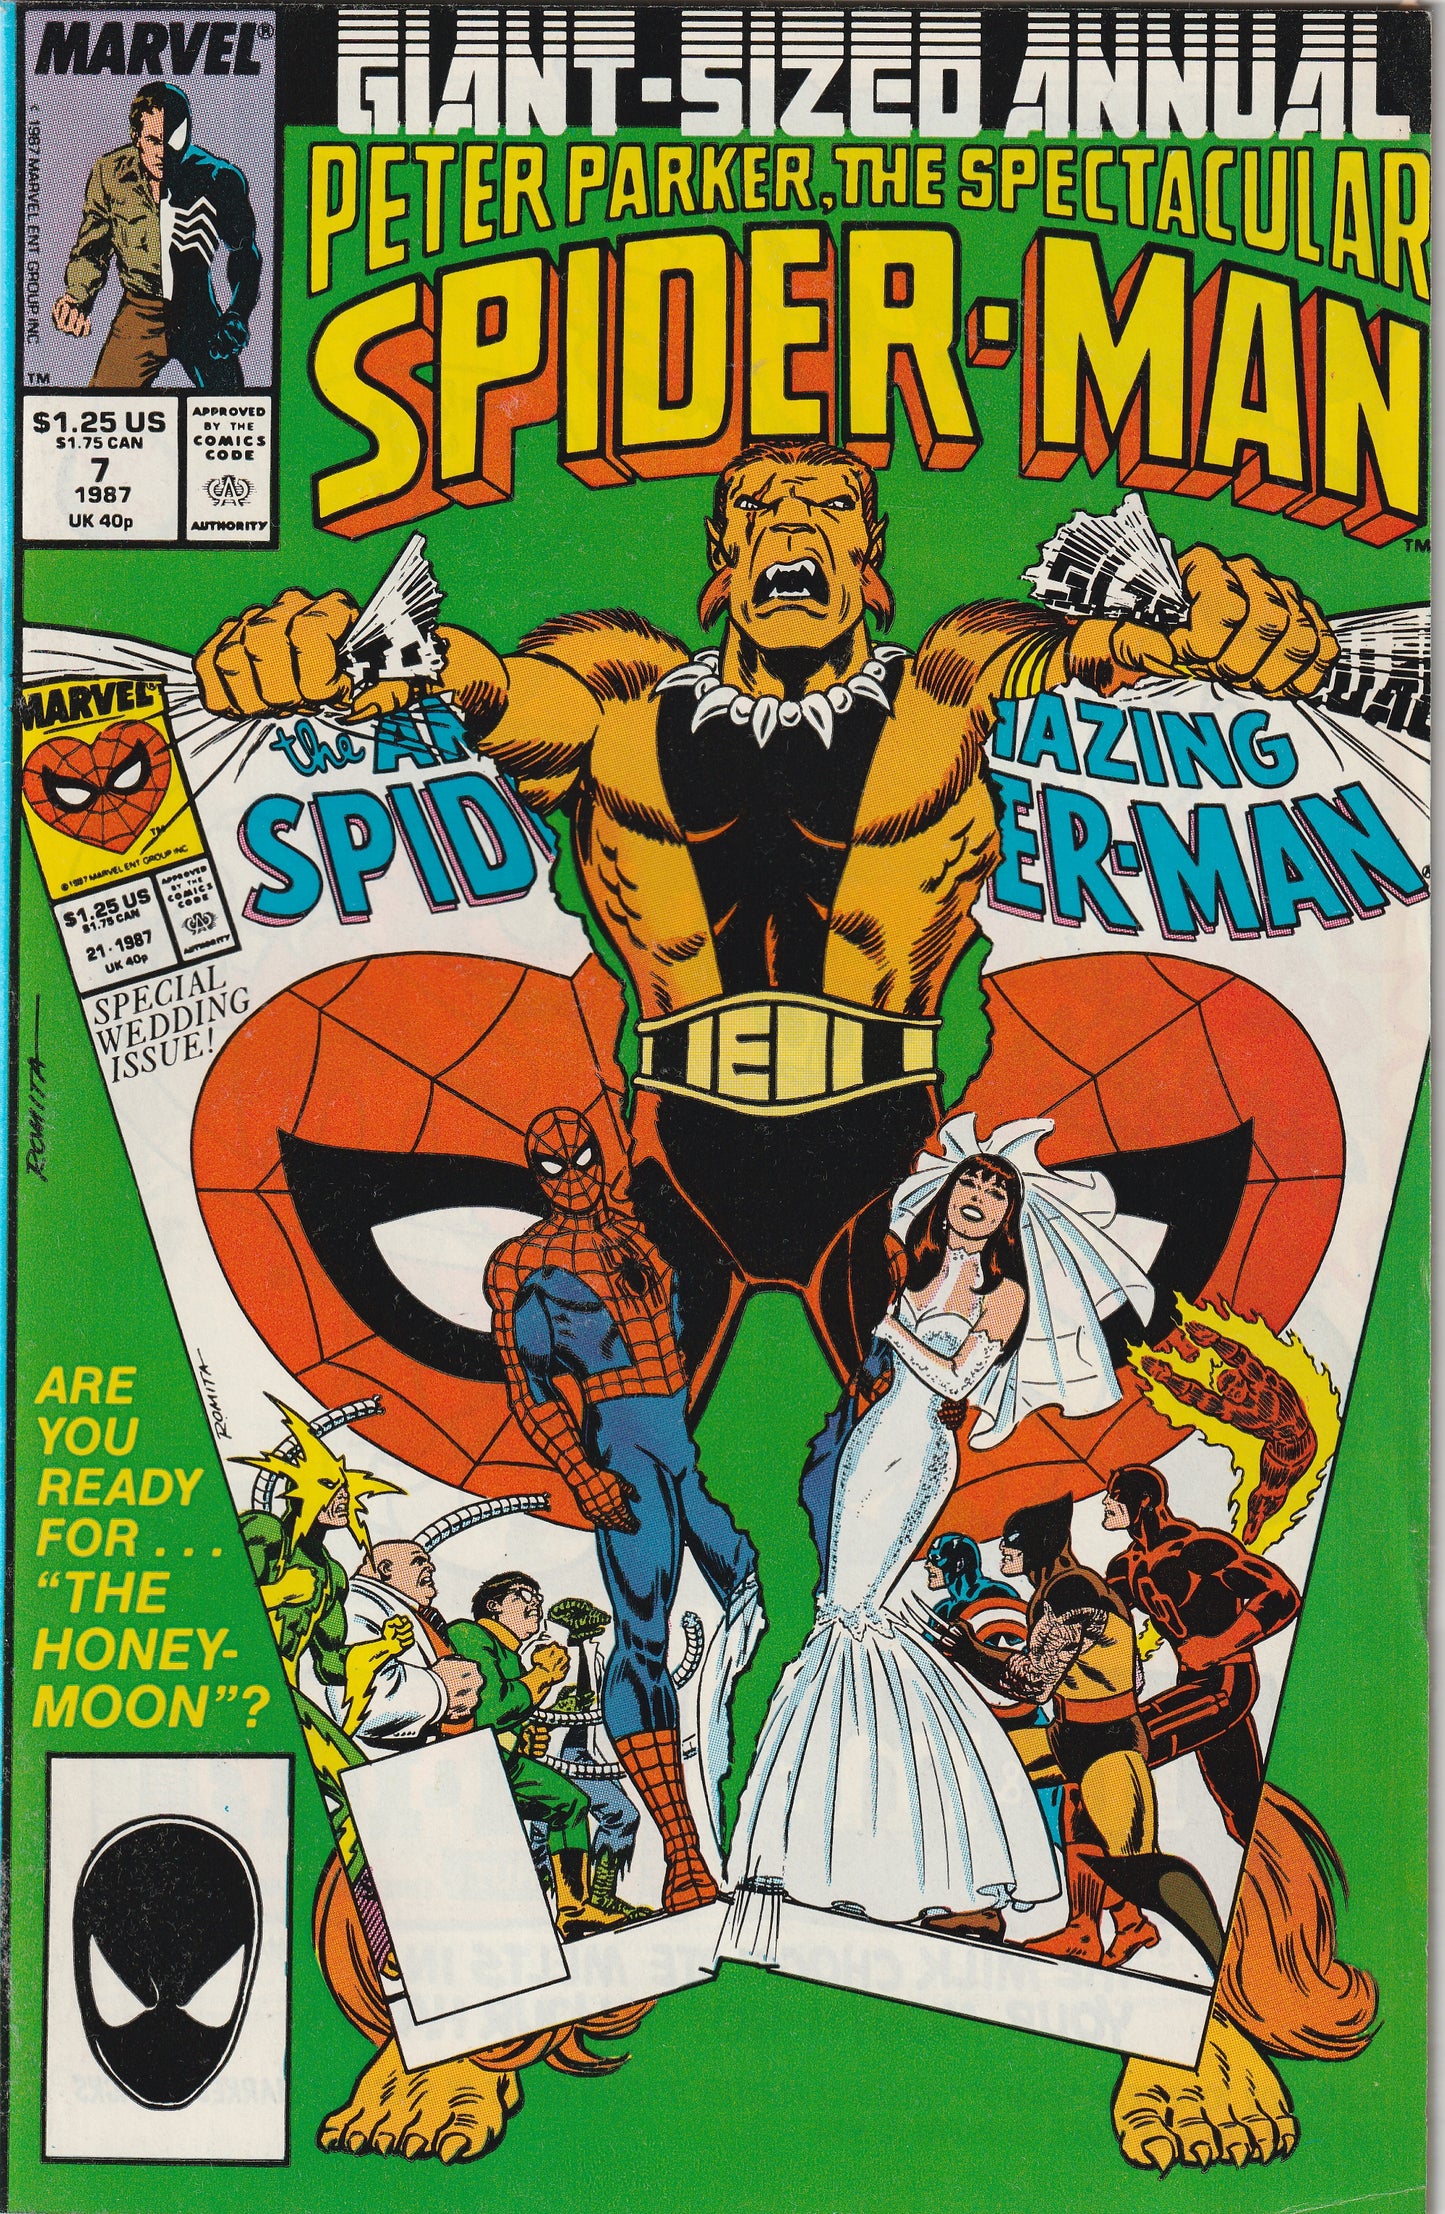 Peter Parker The Spectacular Spider-Man Annual #7 (1987) - Peter and M.J. Honeymoon